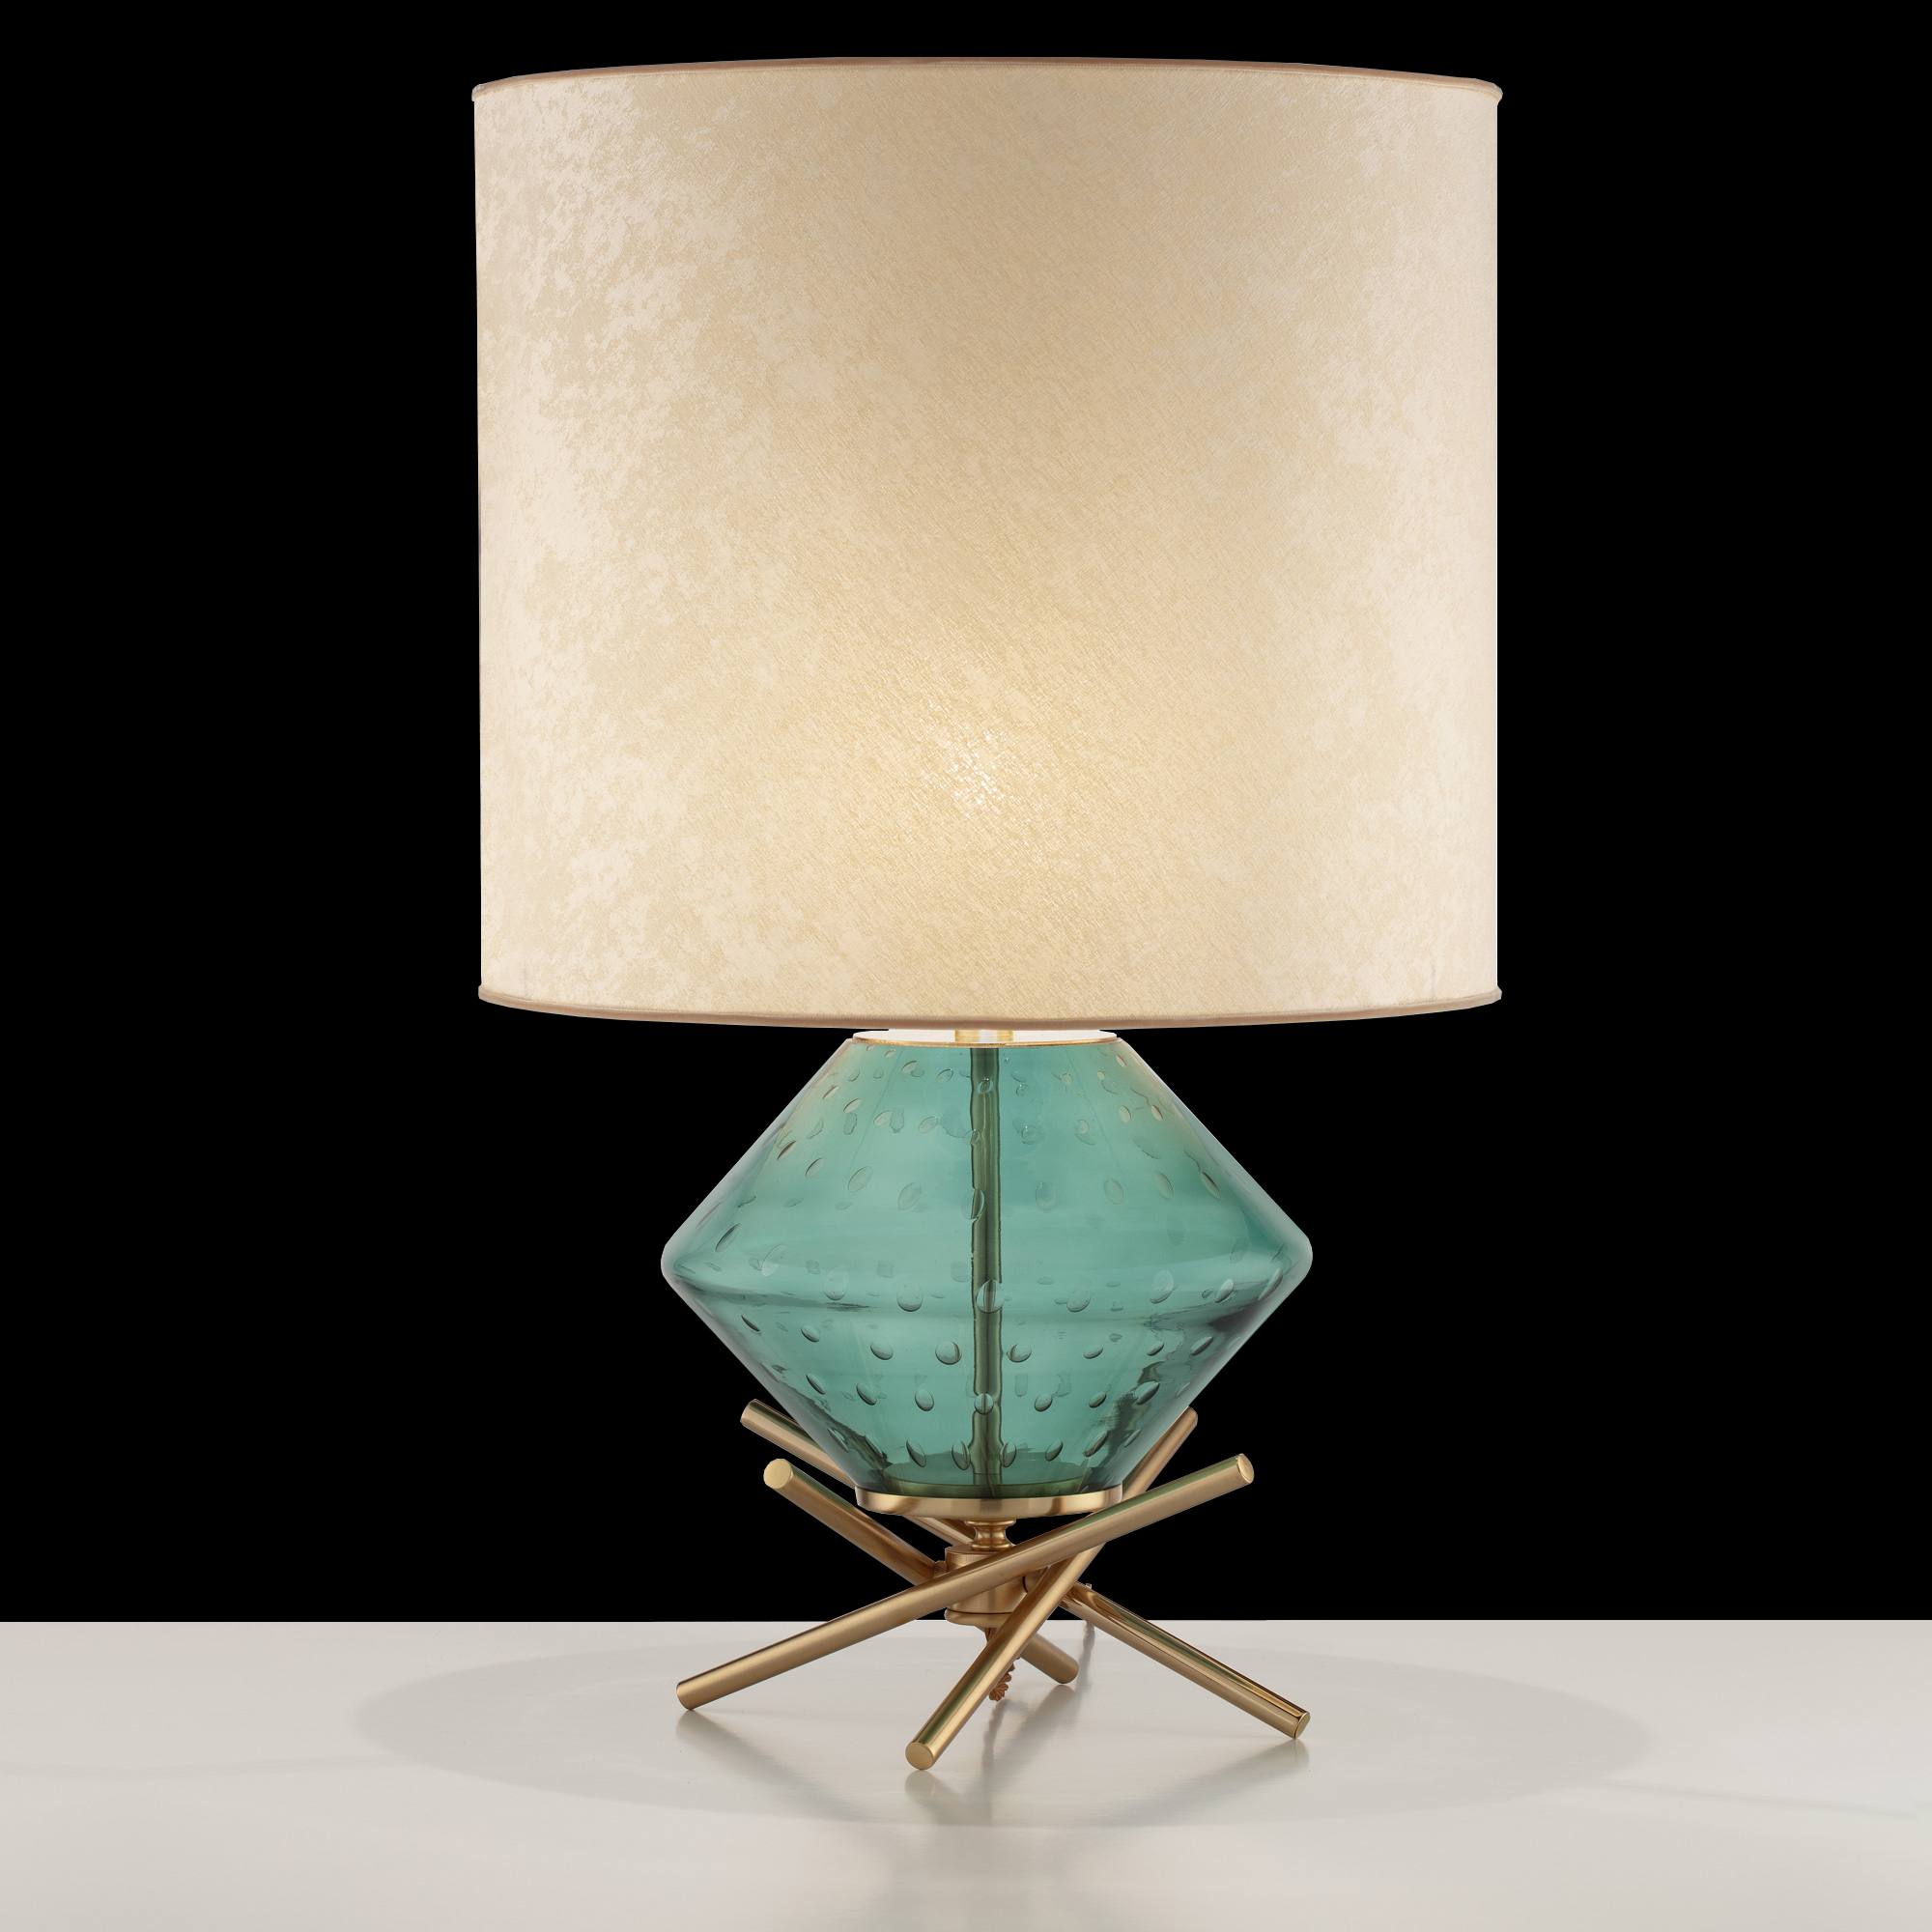 Hand Blown Glass Table Lamp